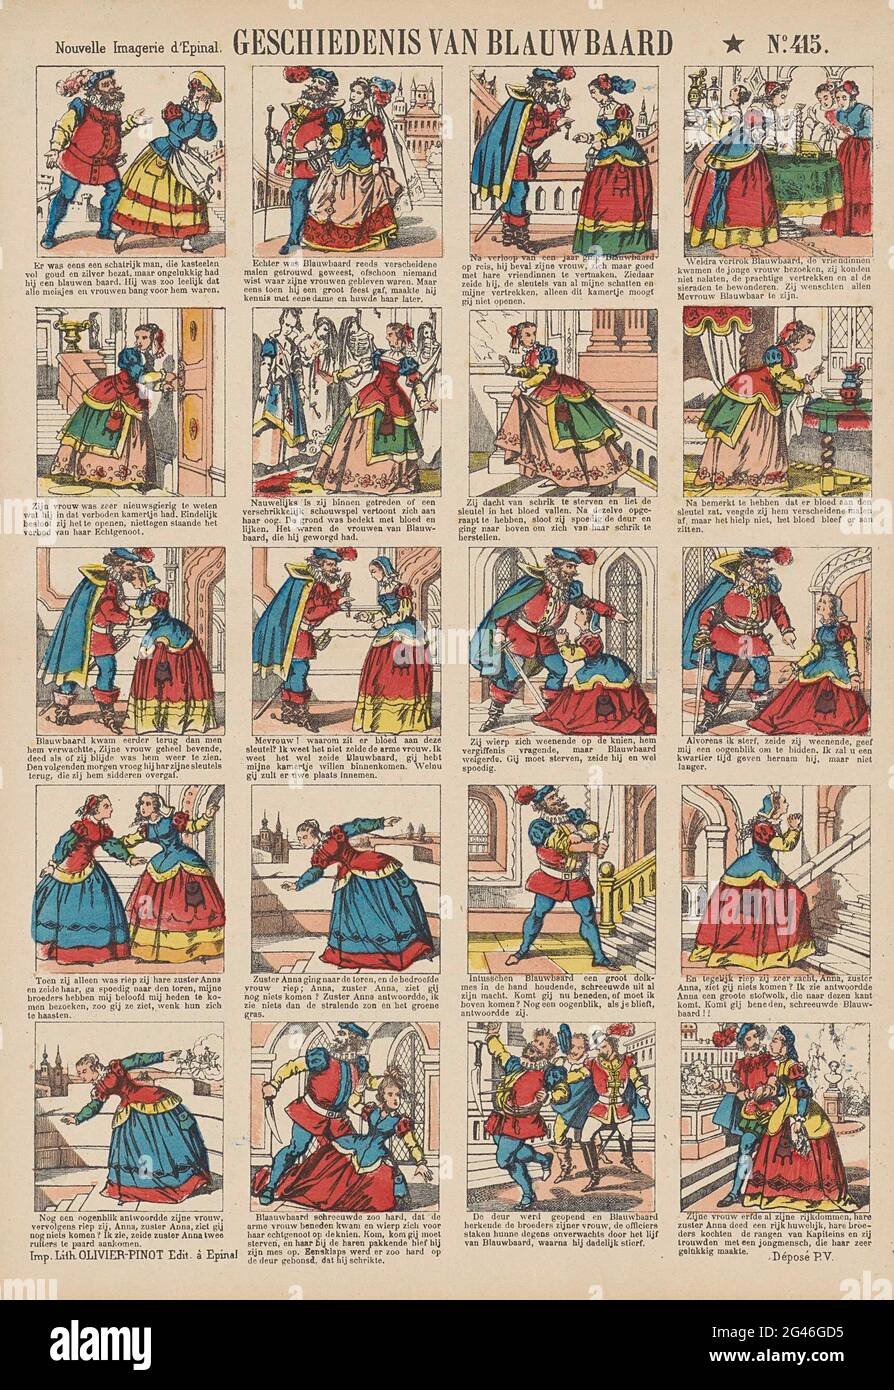 History of blue beard; Nouvelle Imagerie d'Epinal. Leaf with 16  performances from the fairy tale of blue beard. Under every performance a  caption in Dutch. Numbered at the top right: No. 415